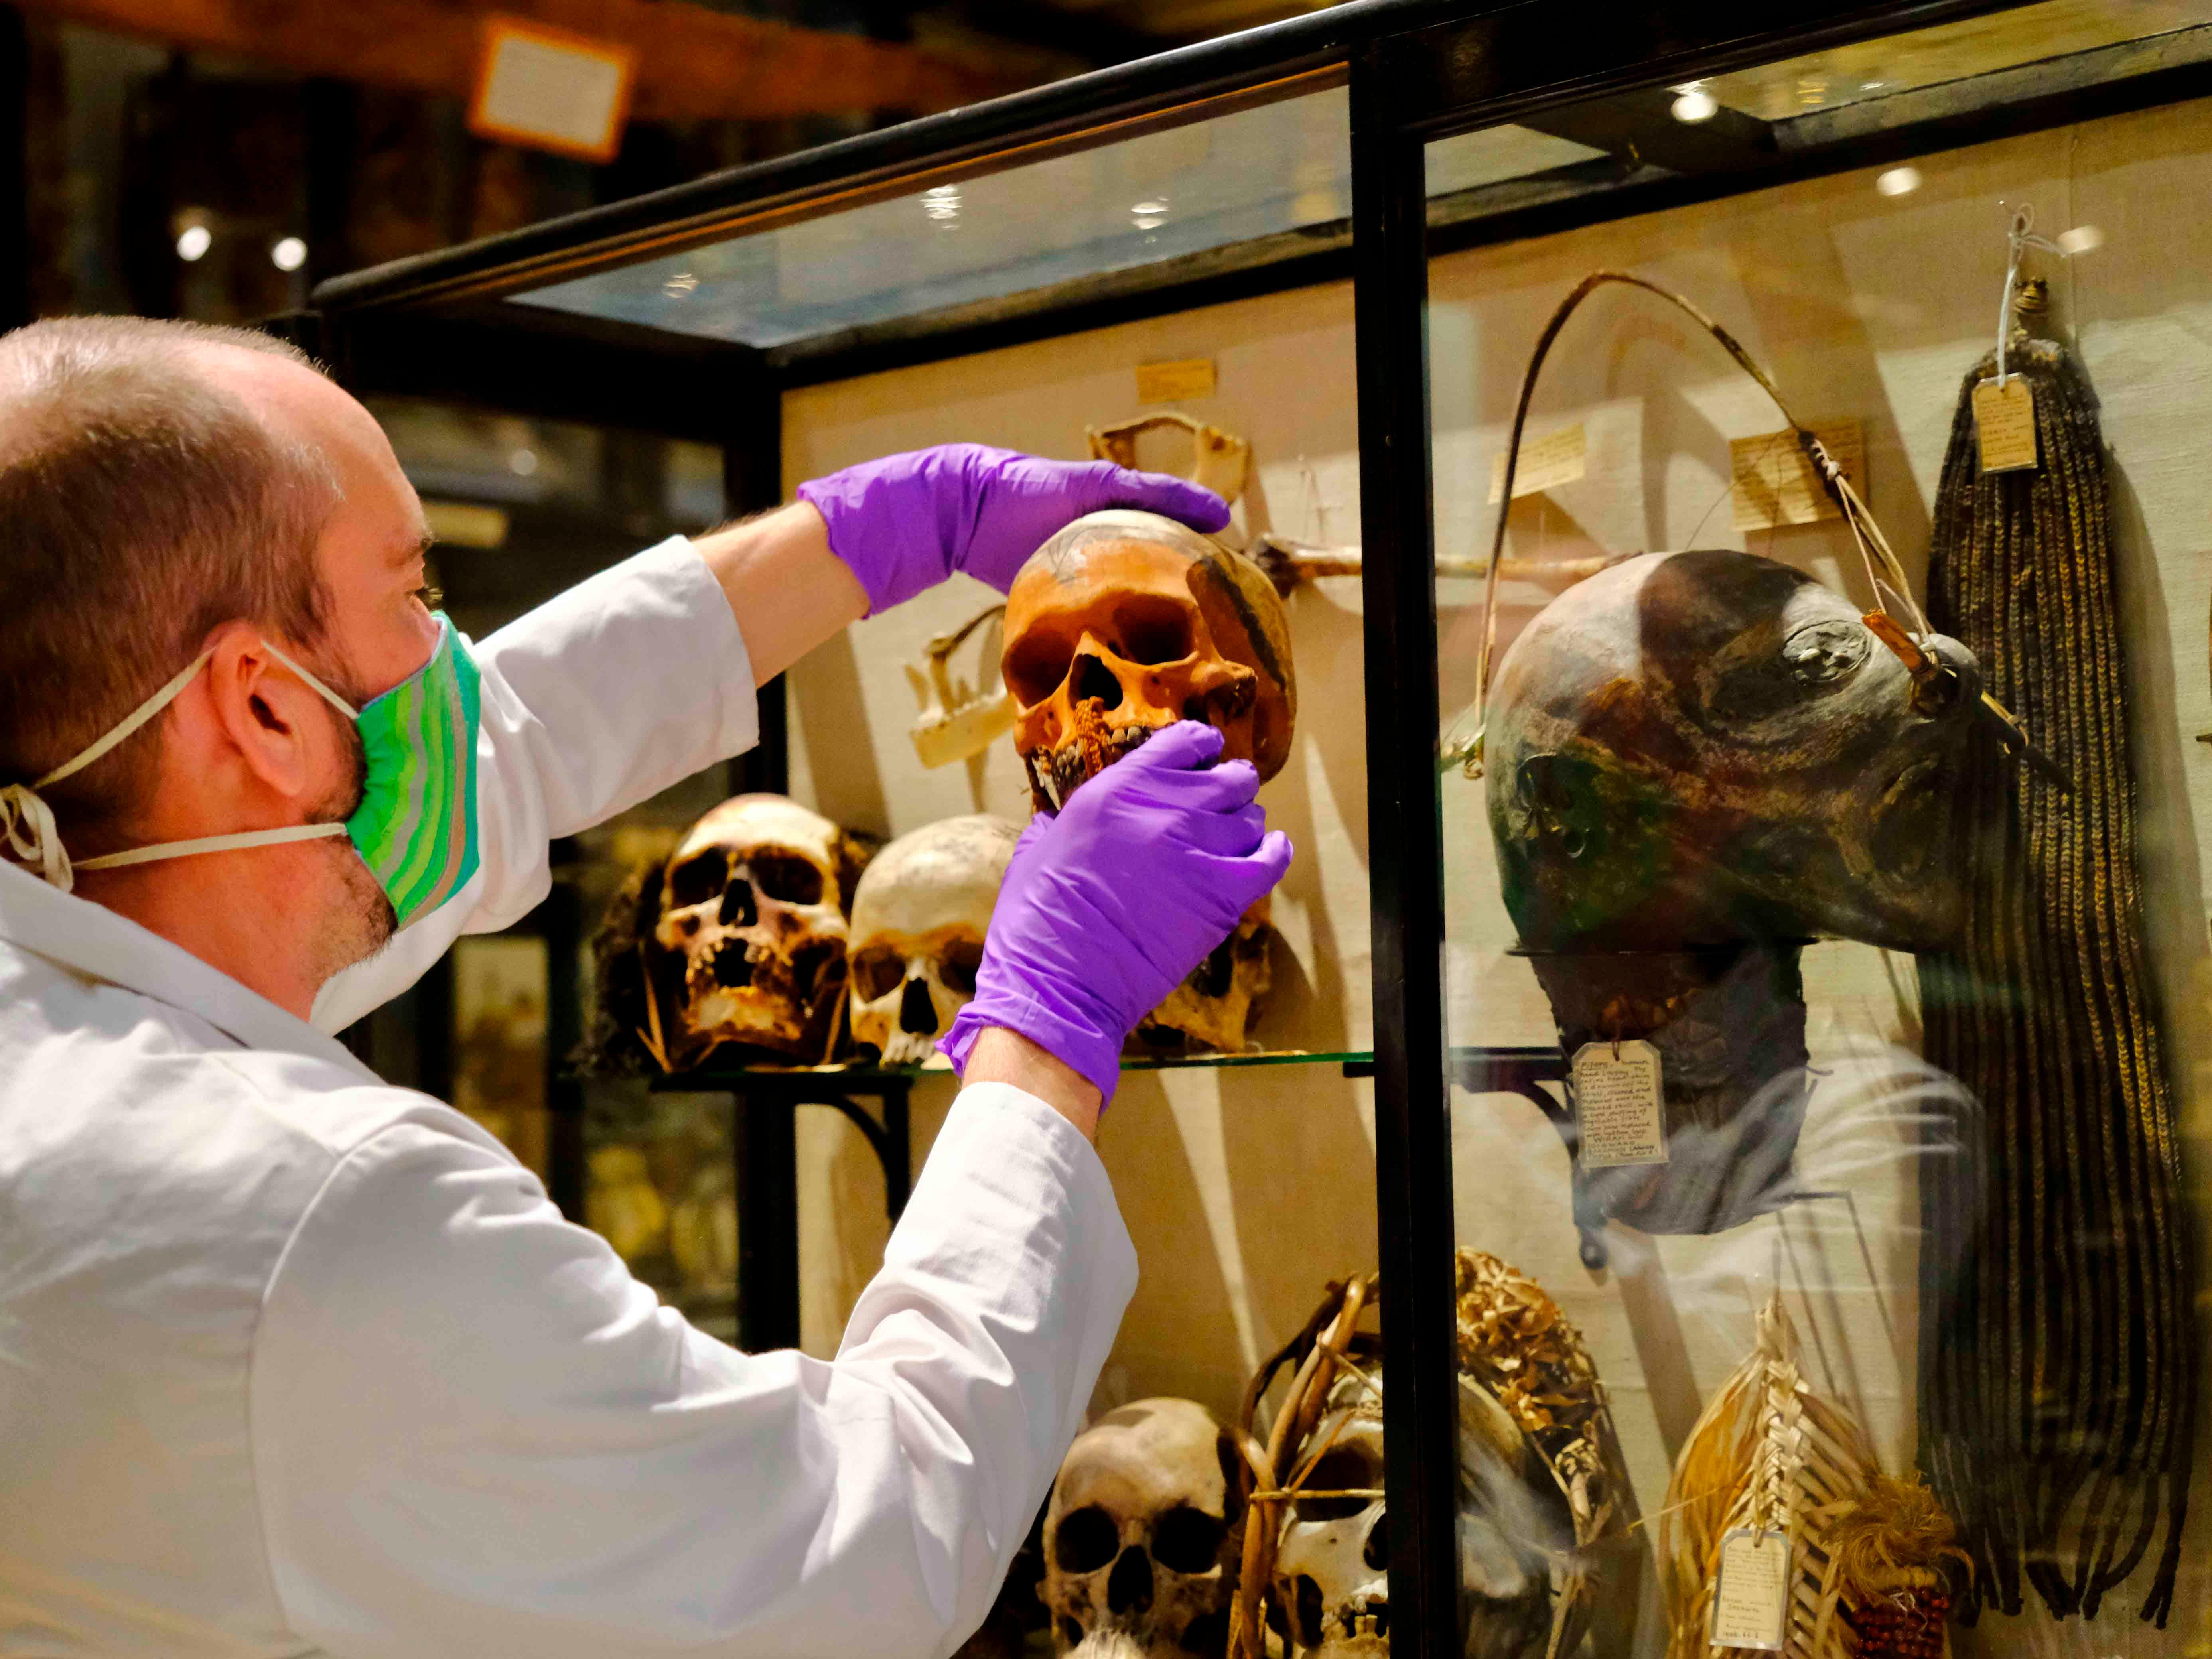 The Pitt Rivers Museum has a problematic past because many of the artefacts on display were stolen from Britain’s former colonies.